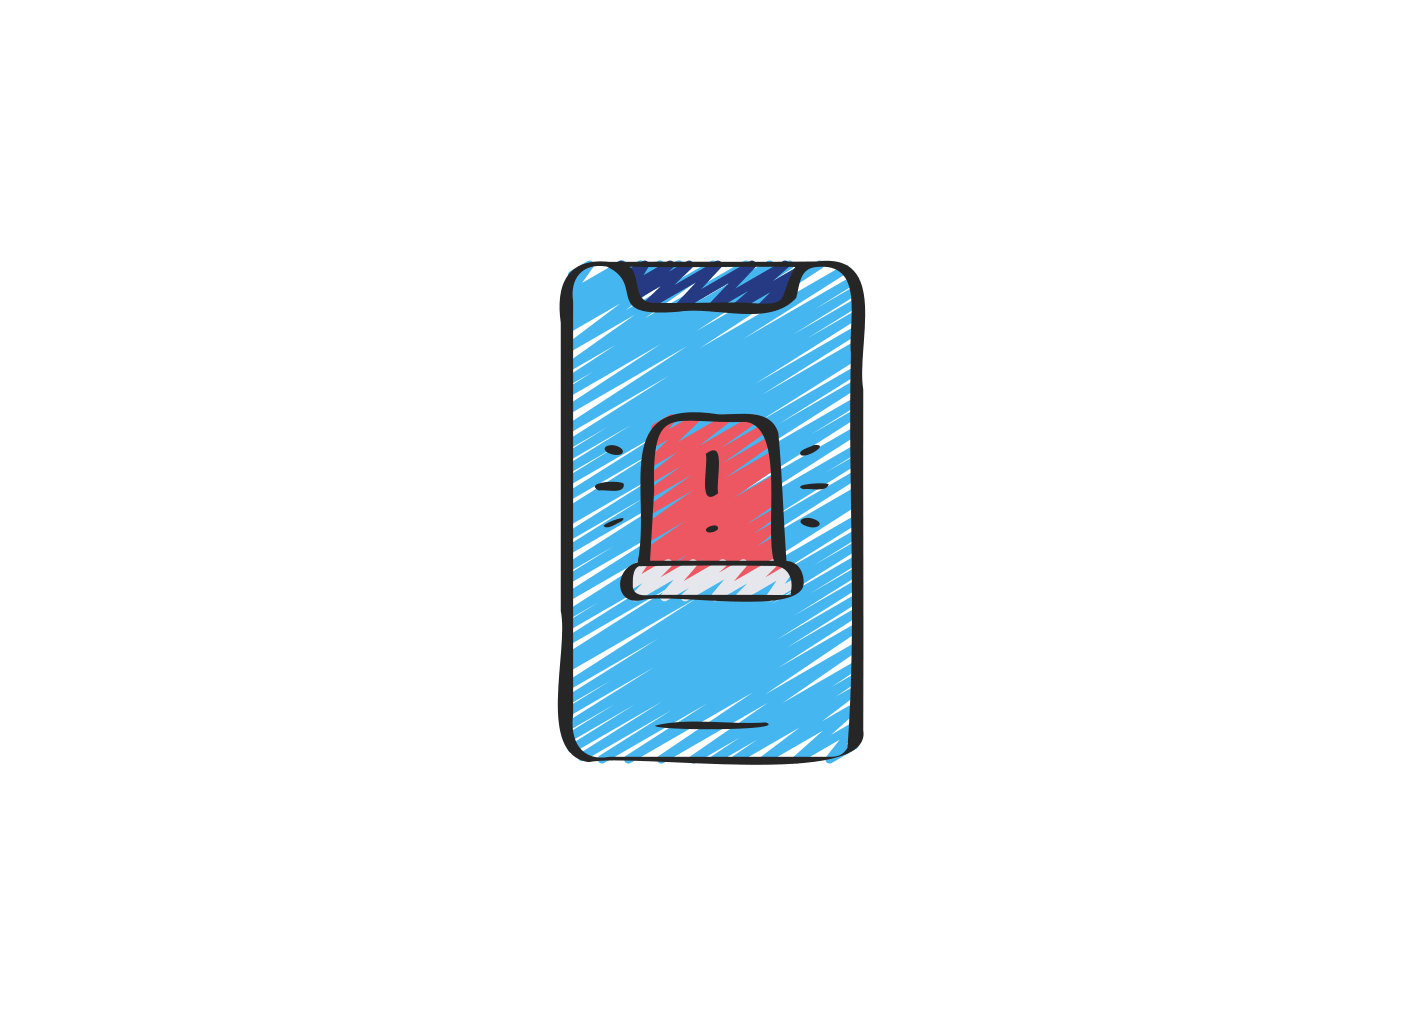 A mobile phone with an alert icon in it, representing an alert when an app rejection happens